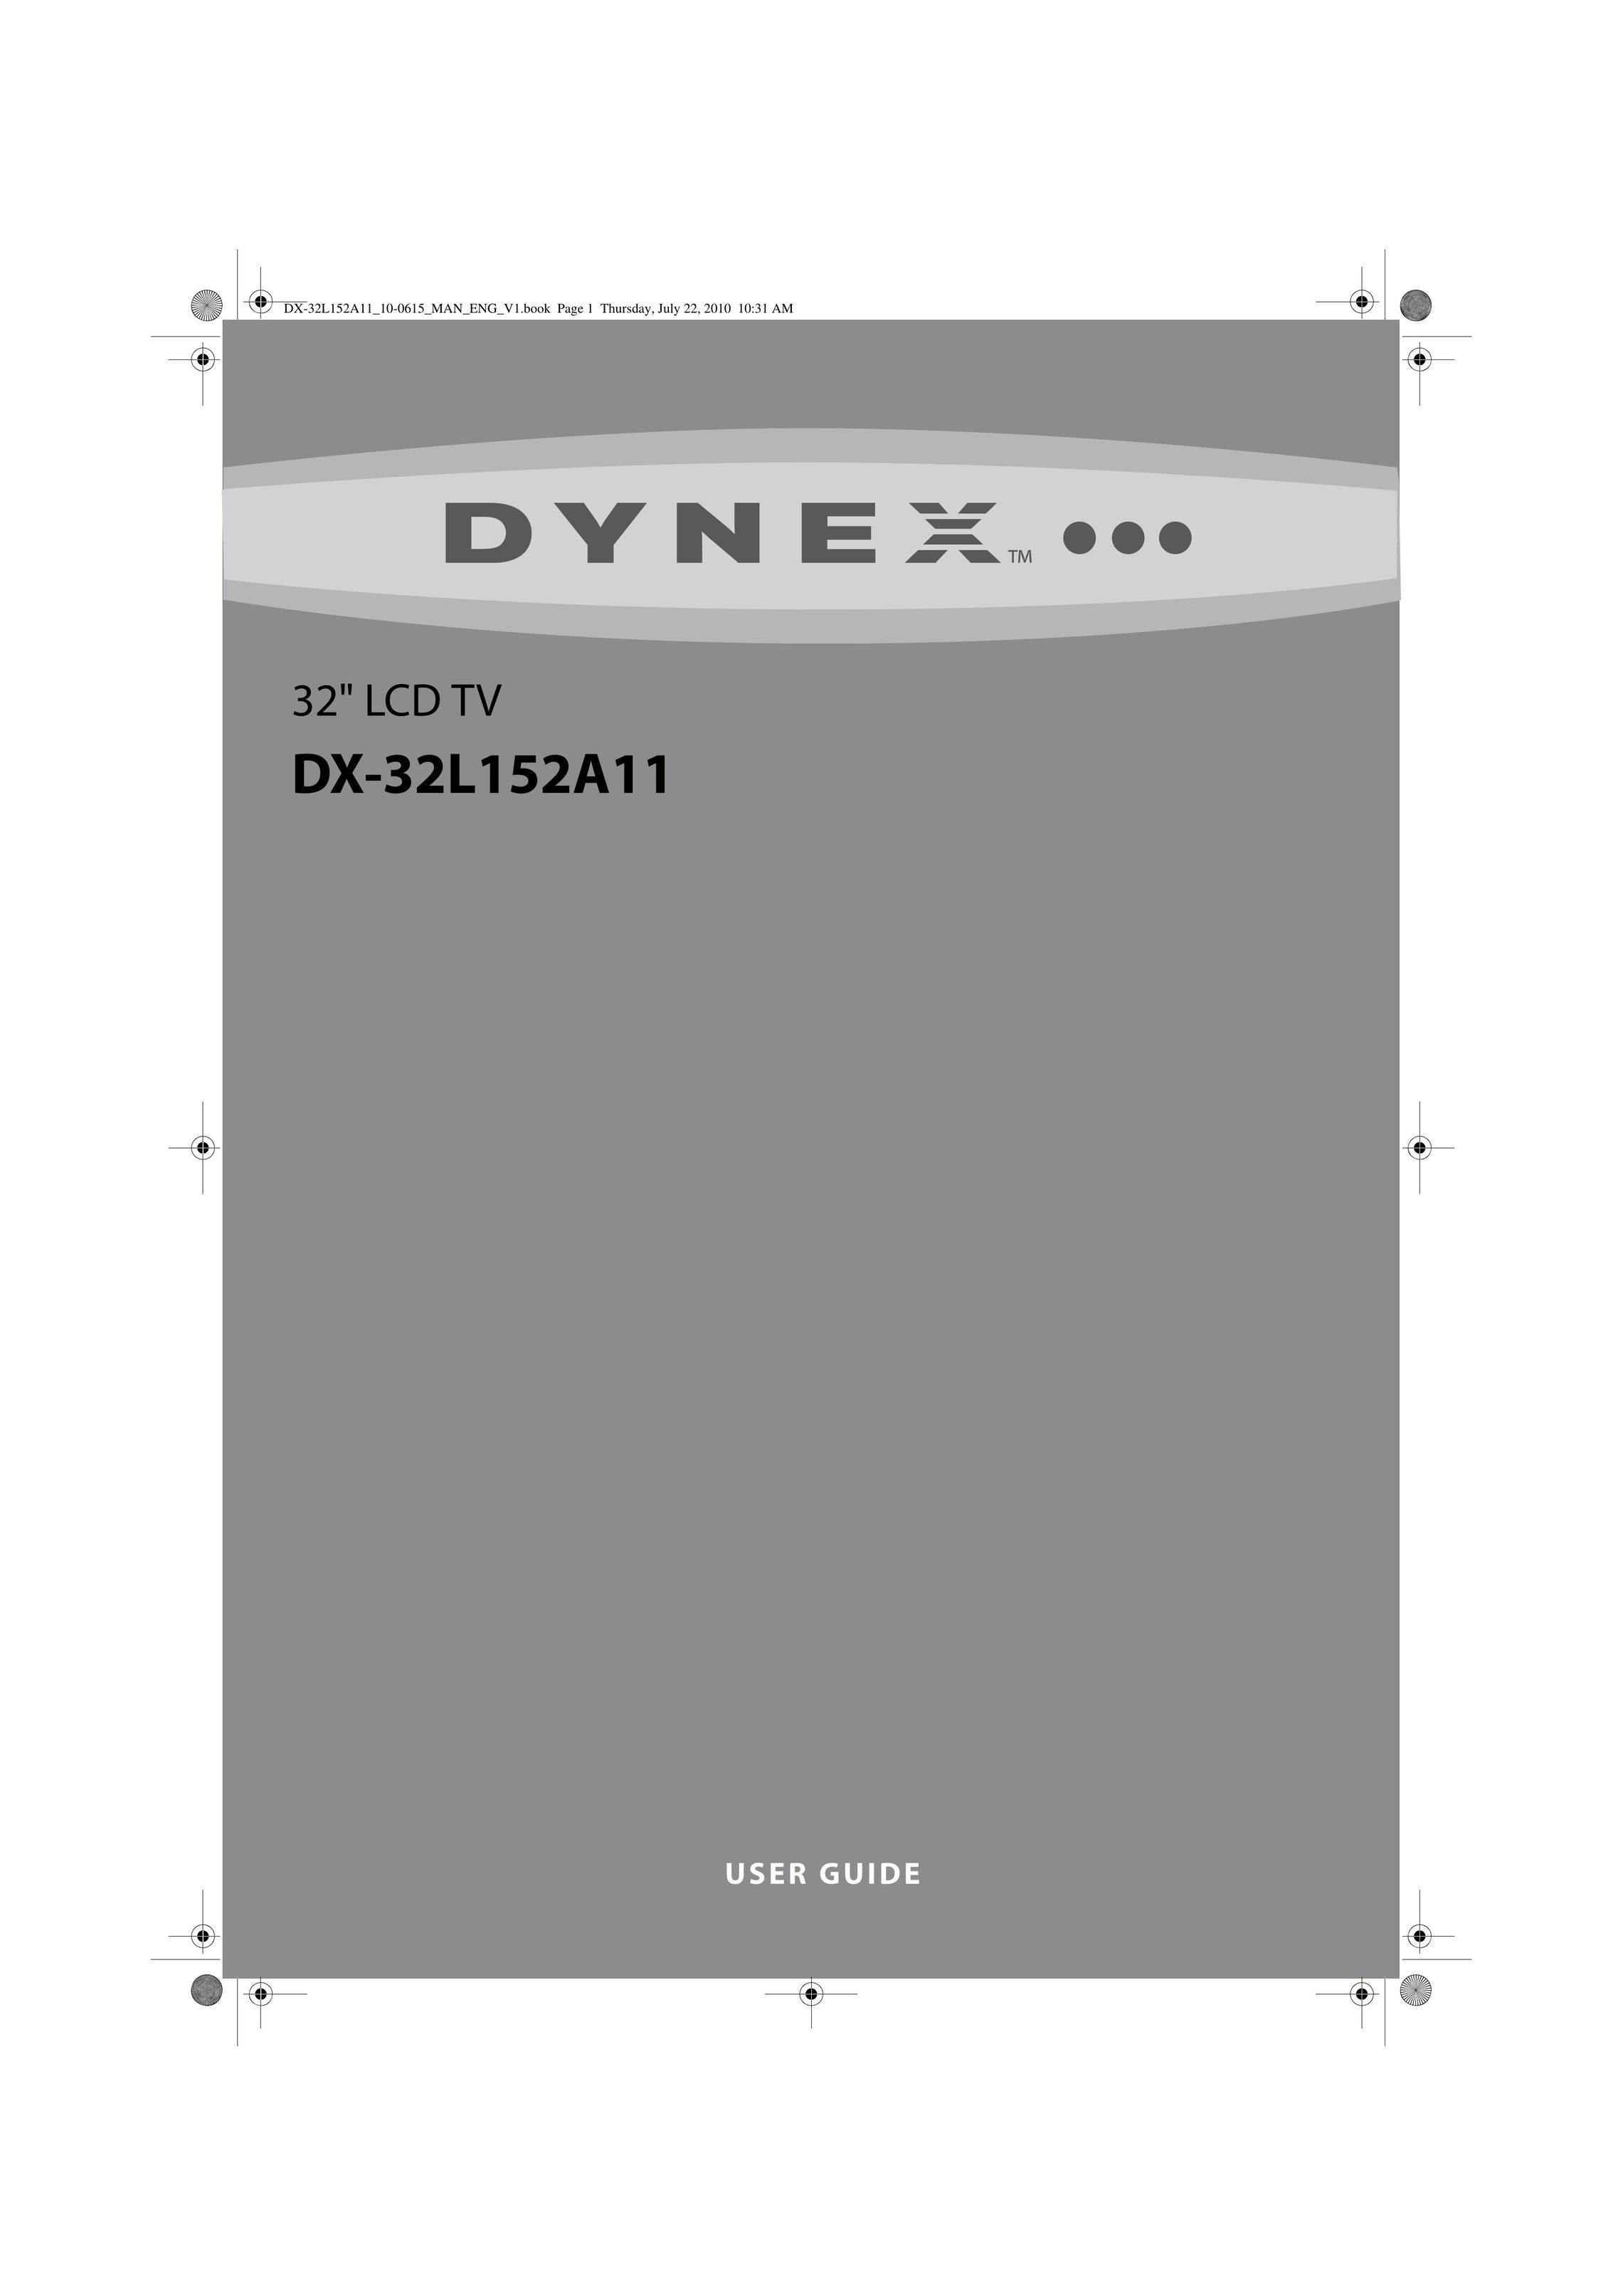 Dynex DX-32L152A11 Flat Panel Television User Manual (Page 1)